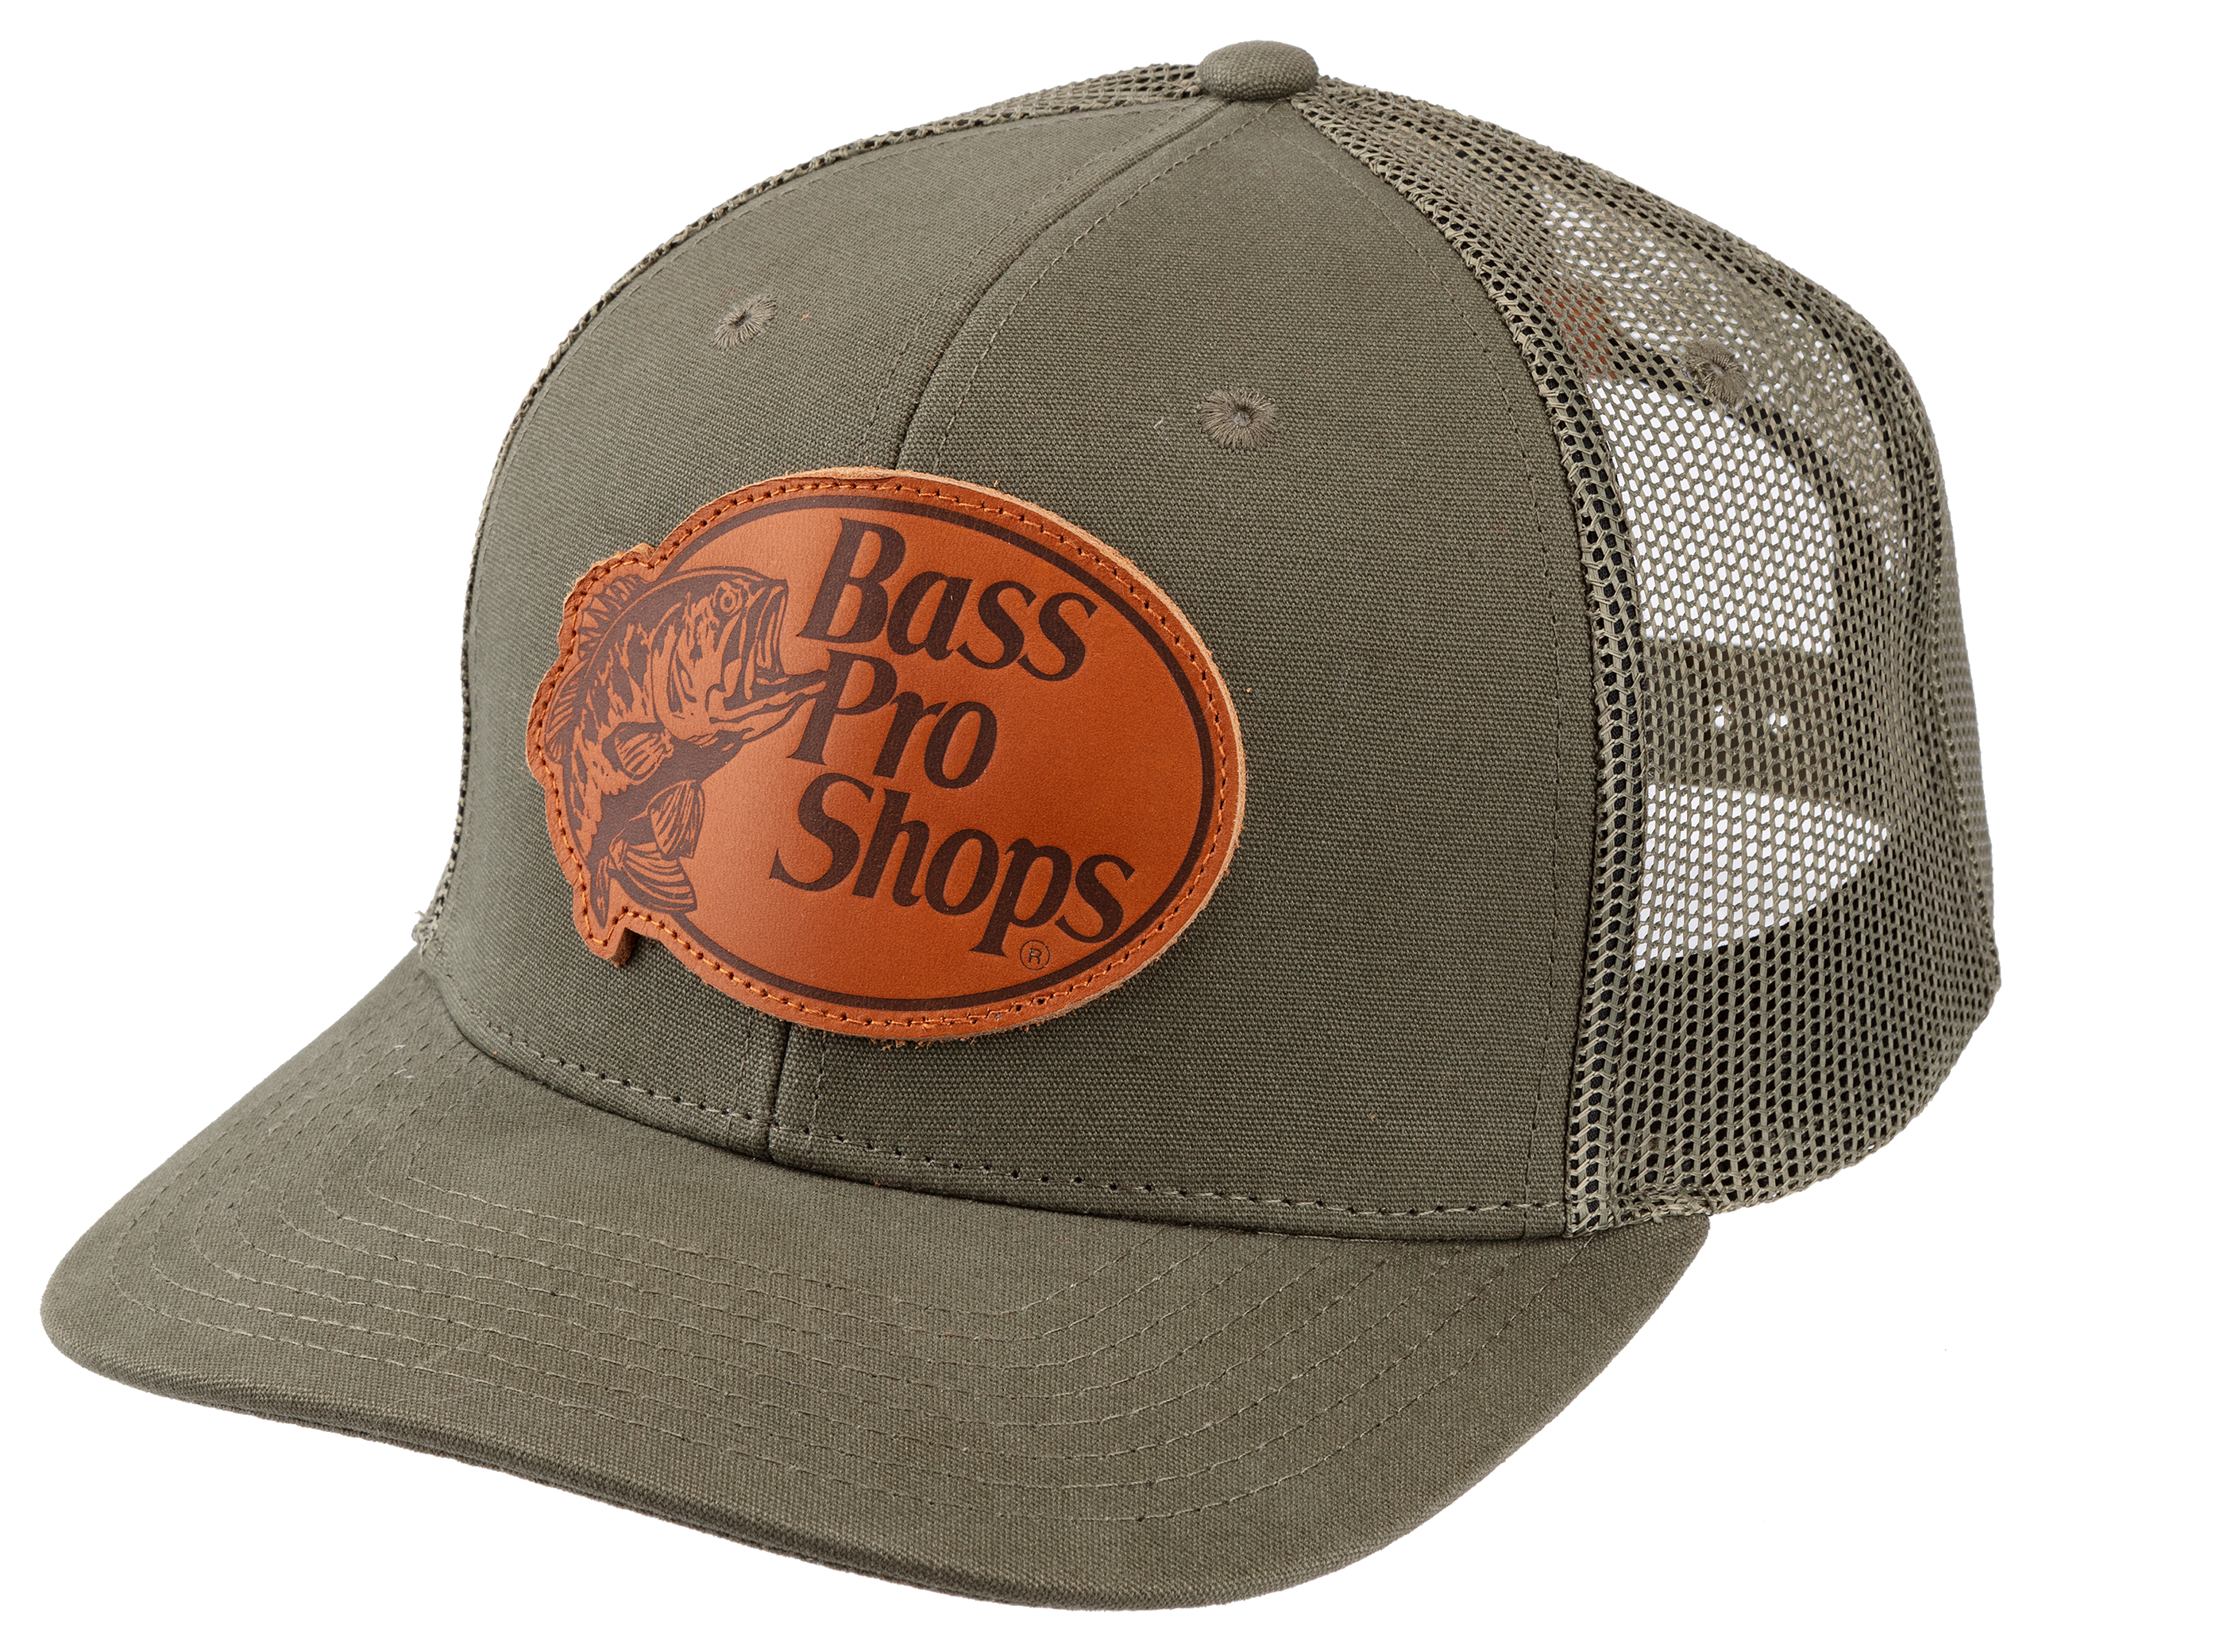 Bass Pro Shops Local Crowns Leather Patch Cap - Olive